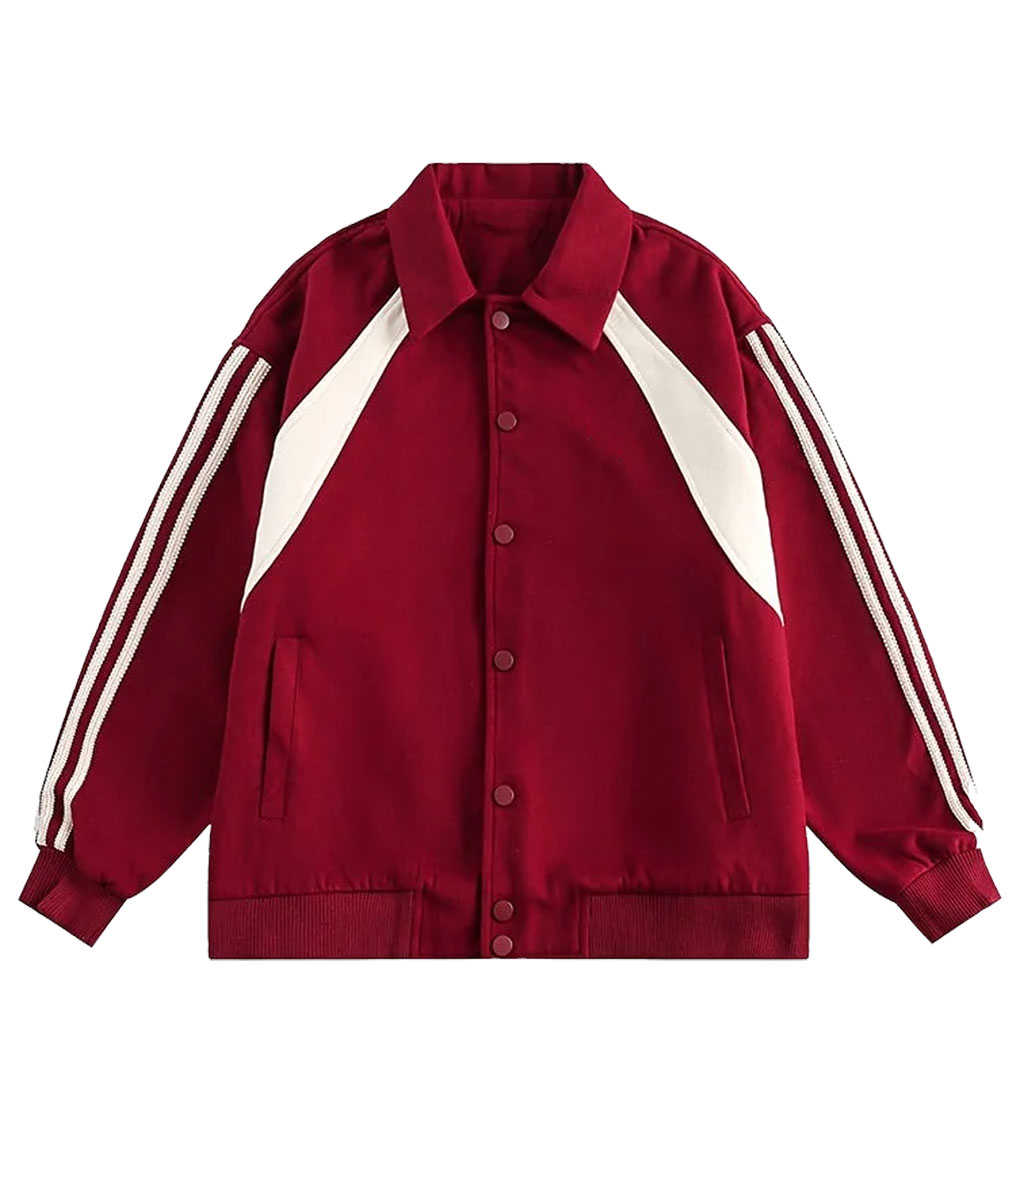 Taylor Swift Red Bomber Jacket (2)